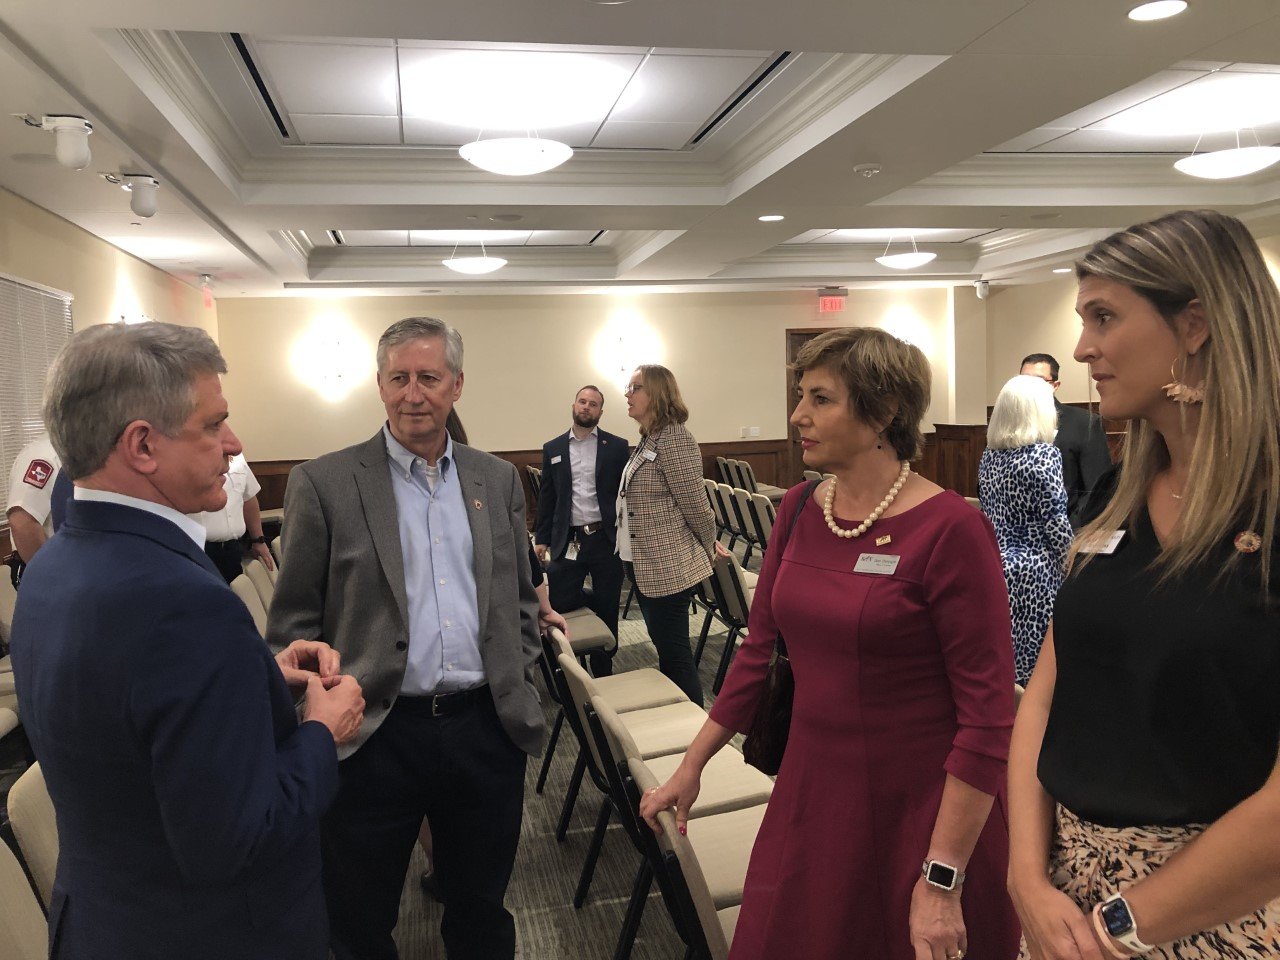 U.S. Rep. Mike McCaul visits with Mayor Dusty Thiele, Katy school trustee Dawn Champagne and Ward B Council Member Gina Hicks at a small ceremony Thursday morning at City Hall.